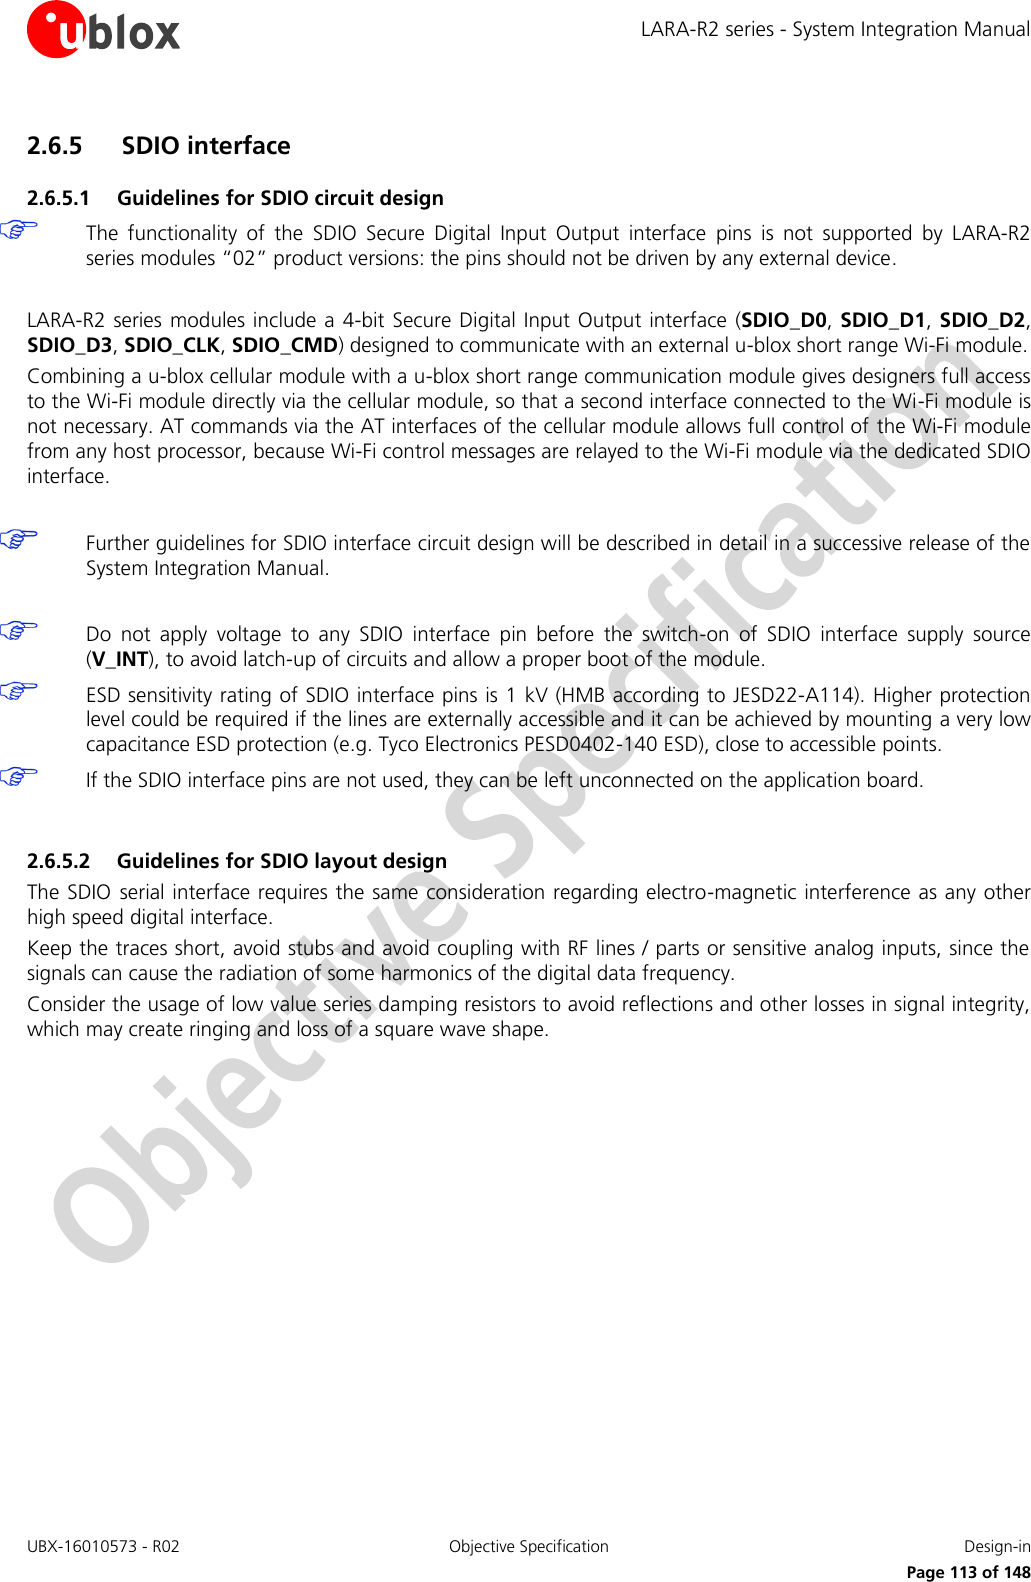 LARA-R2 series - System Integration Manual UBX-16010573 - R02  Objective Specification  Design-in     Page 113 of 148 2.6.5 SDIO interface 2.6.5.1 Guidelines for SDIO circuit design  The  functionality  of  the  SDIO  Secure  Digital  Input  Output  interface  pins  is  not  supported  by  LARA-R2 series modules “02” product versions: the pins should not be driven by any external device.   LARA-R2 series modules include a 4-bit Secure Digital Input Output interface (SDIO_D0, SDIO_D1, SDIO_D2, SDIO_D3, SDIO_CLK, SDIO_CMD) designed to communicate with an external u-blox short range Wi-Fi module. Combining a u-blox cellular module with a u-blox short range communication module gives designers full access to the Wi-Fi module directly via the cellular module, so that a second interface connected to the Wi-Fi module is not necessary. AT commands via the AT interfaces of the cellular module allows full control of the Wi-Fi module from any host processor, because Wi-Fi control messages are relayed to the Wi-Fi module via the dedicated SDIO interface.   Further guidelines for SDIO interface circuit design will be described in detail in a successive release of the System Integration Manual.   Do  not  apply  voltage  to  any  SDIO  interface  pin  before  the  switch-on  of  SDIO  interface  supply  source (V_INT), to avoid latch-up of circuits and allow a proper boot of the module.  ESD sensitivity rating of SDIO interface pins is 1 kV (HMB according to JESD22-A114). Higher protection level could be required if the lines are externally accessible and it can be achieved by mounting a very low capacitance ESD protection (e.g. Tyco Electronics PESD0402-140 ESD), close to accessible points.  If the SDIO interface pins are not used, they can be left unconnected on the application board.  2.6.5.2 Guidelines for SDIO layout design The SDIO serial interface requires the same consideration regarding electro-magnetic interference as any other high speed digital interface. Keep the traces short, avoid stubs and avoid coupling with RF lines / parts or sensitive analog inputs, since the signals can cause the radiation of some harmonics of the digital data frequency. Consider the usage of low value series damping resistors to avoid reflections and other losses in signal integrity, which may create ringing and loss of a square wave shape.  